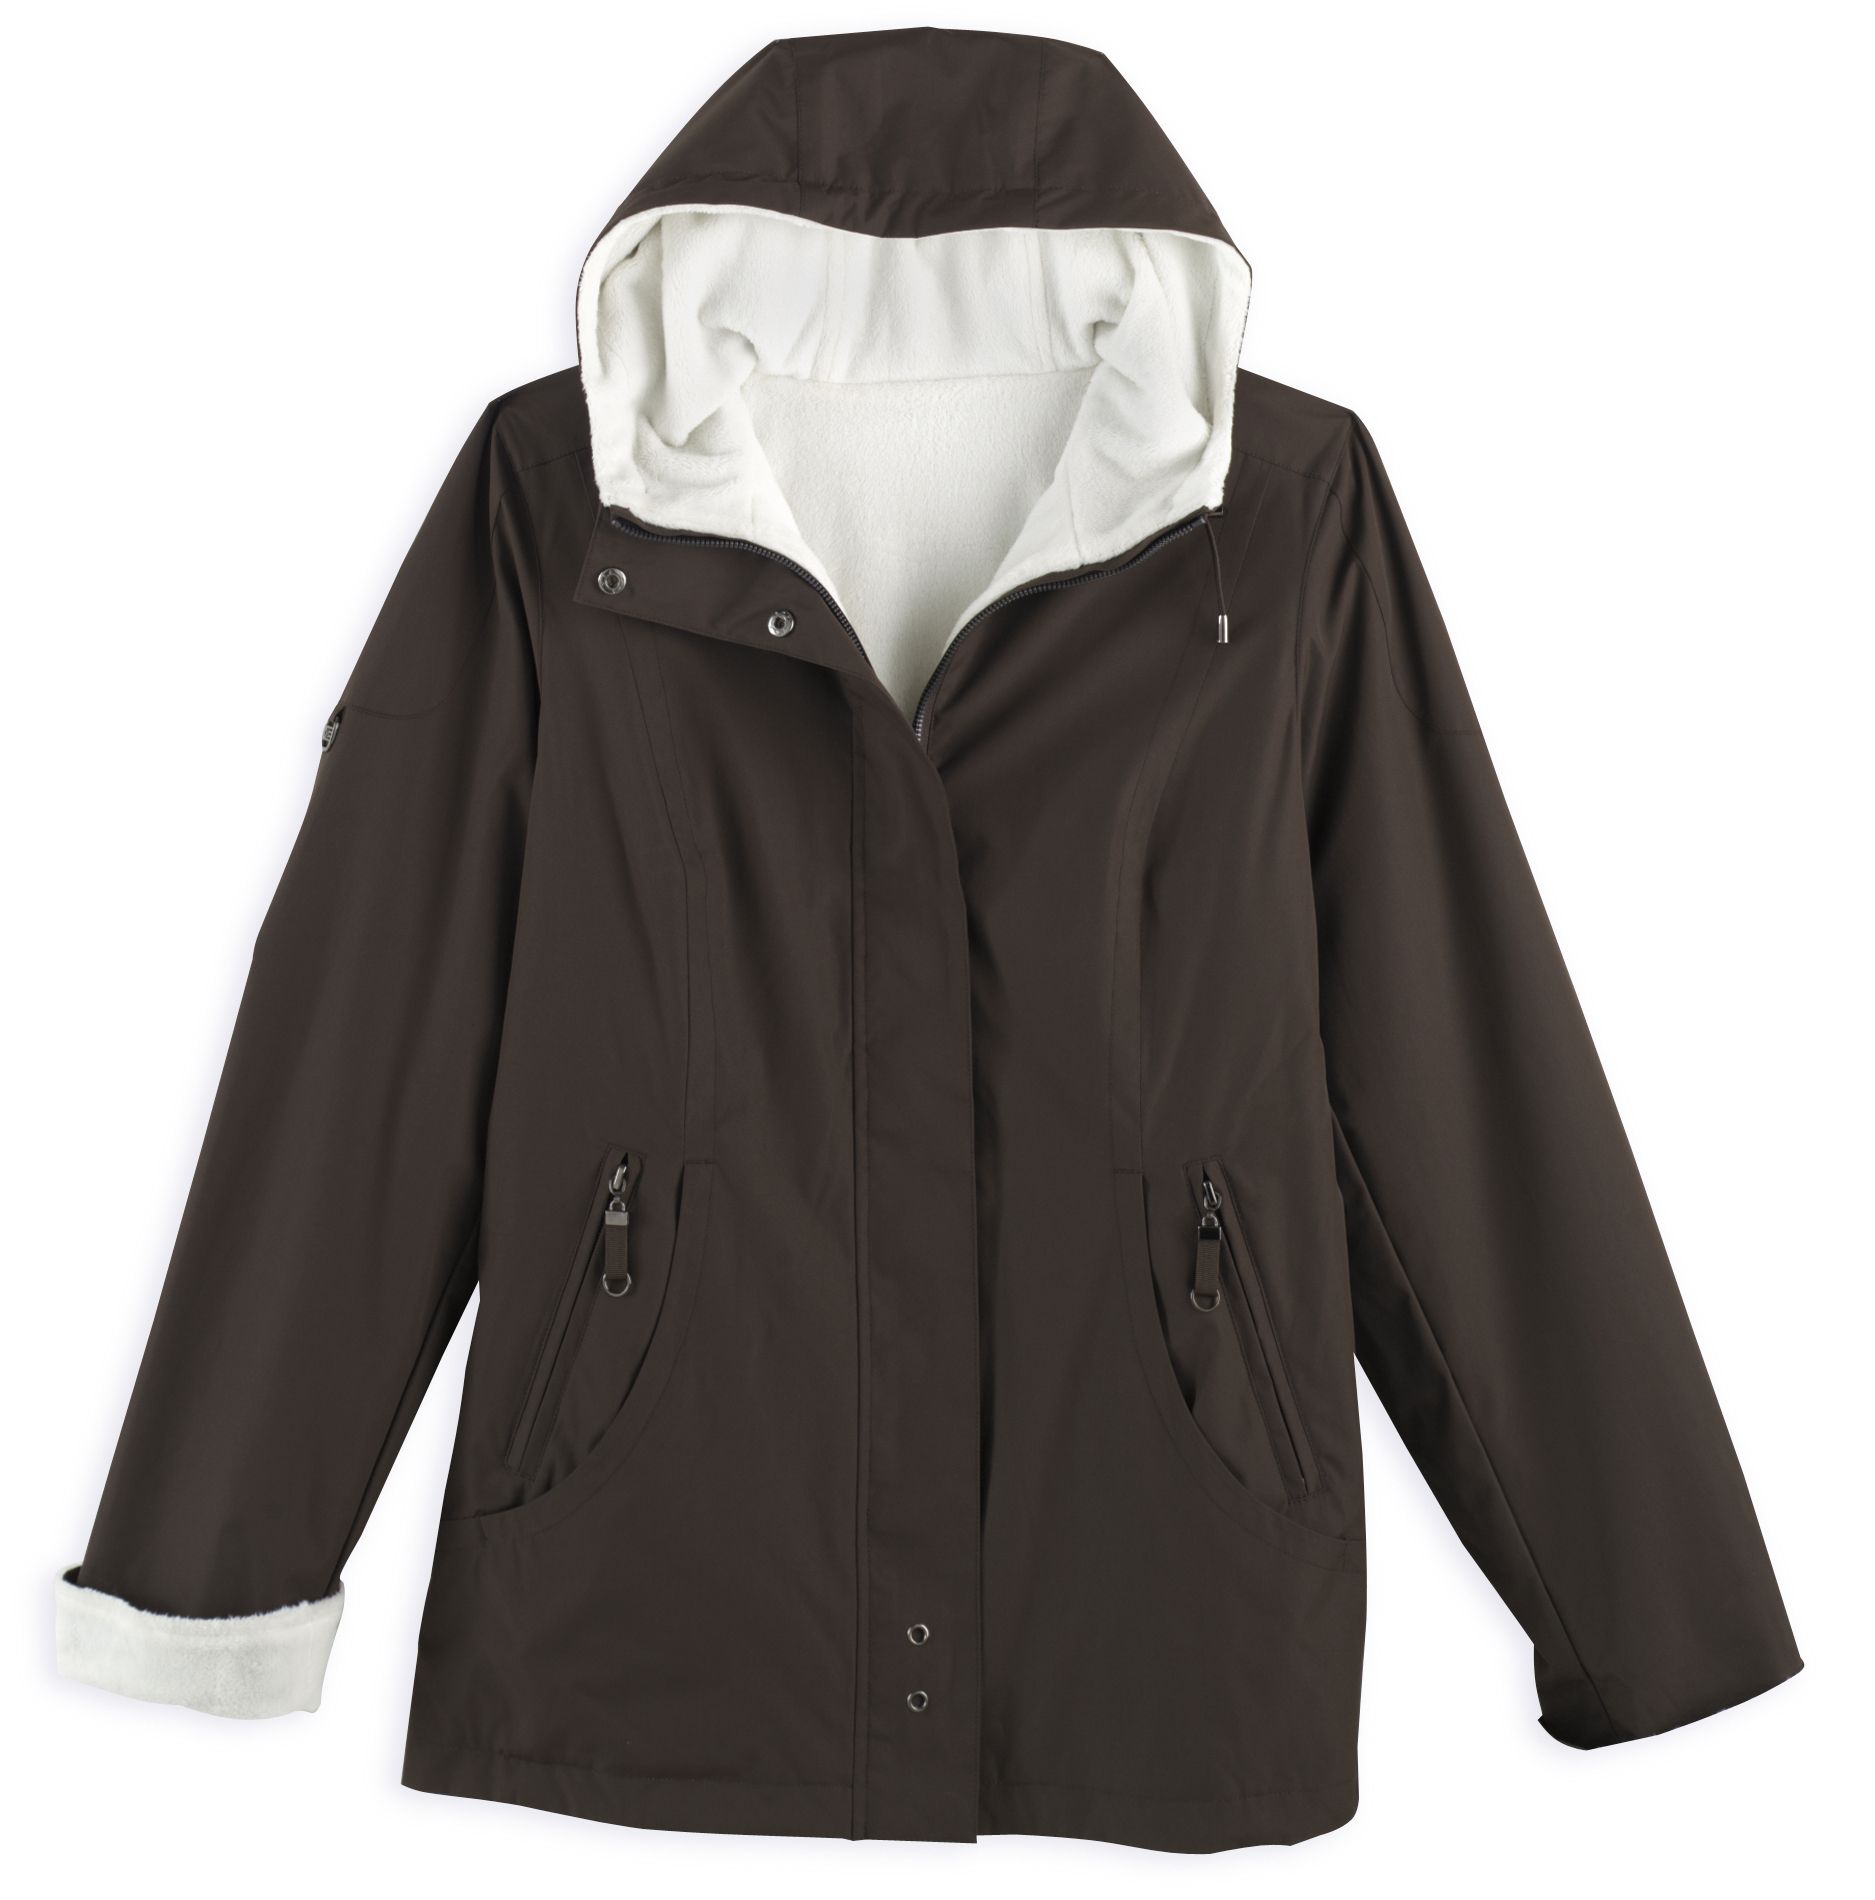 Free Country Radiance Reversible Jacket